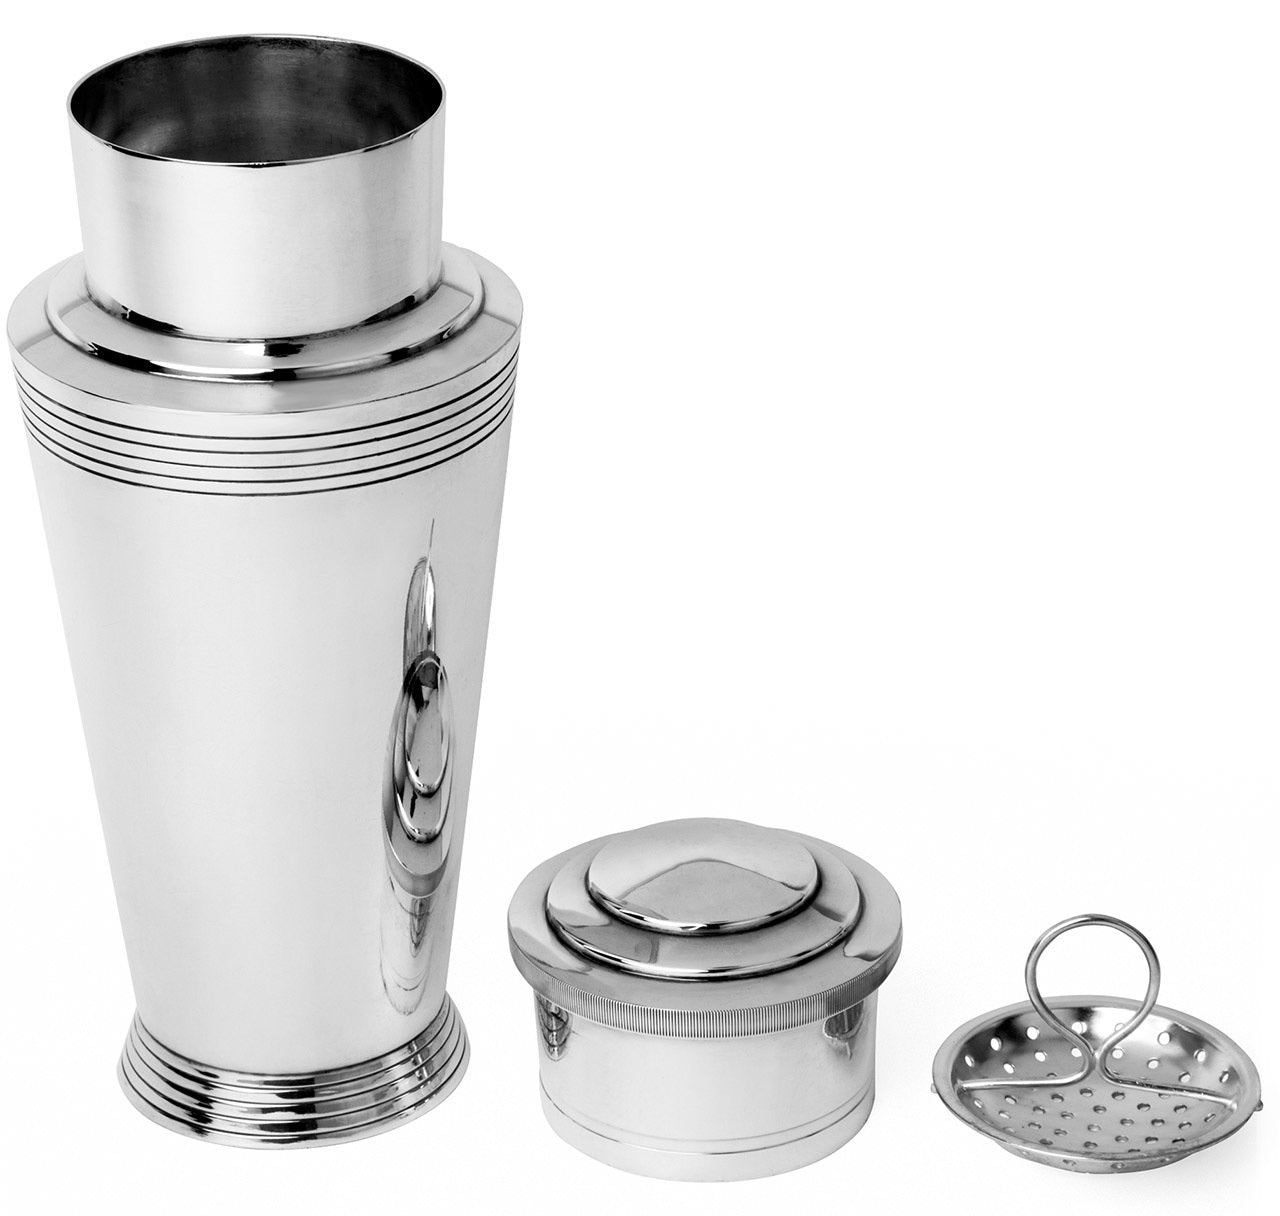 Keith Murray Silver-Plated 'Athenian' Cocktail Shaker